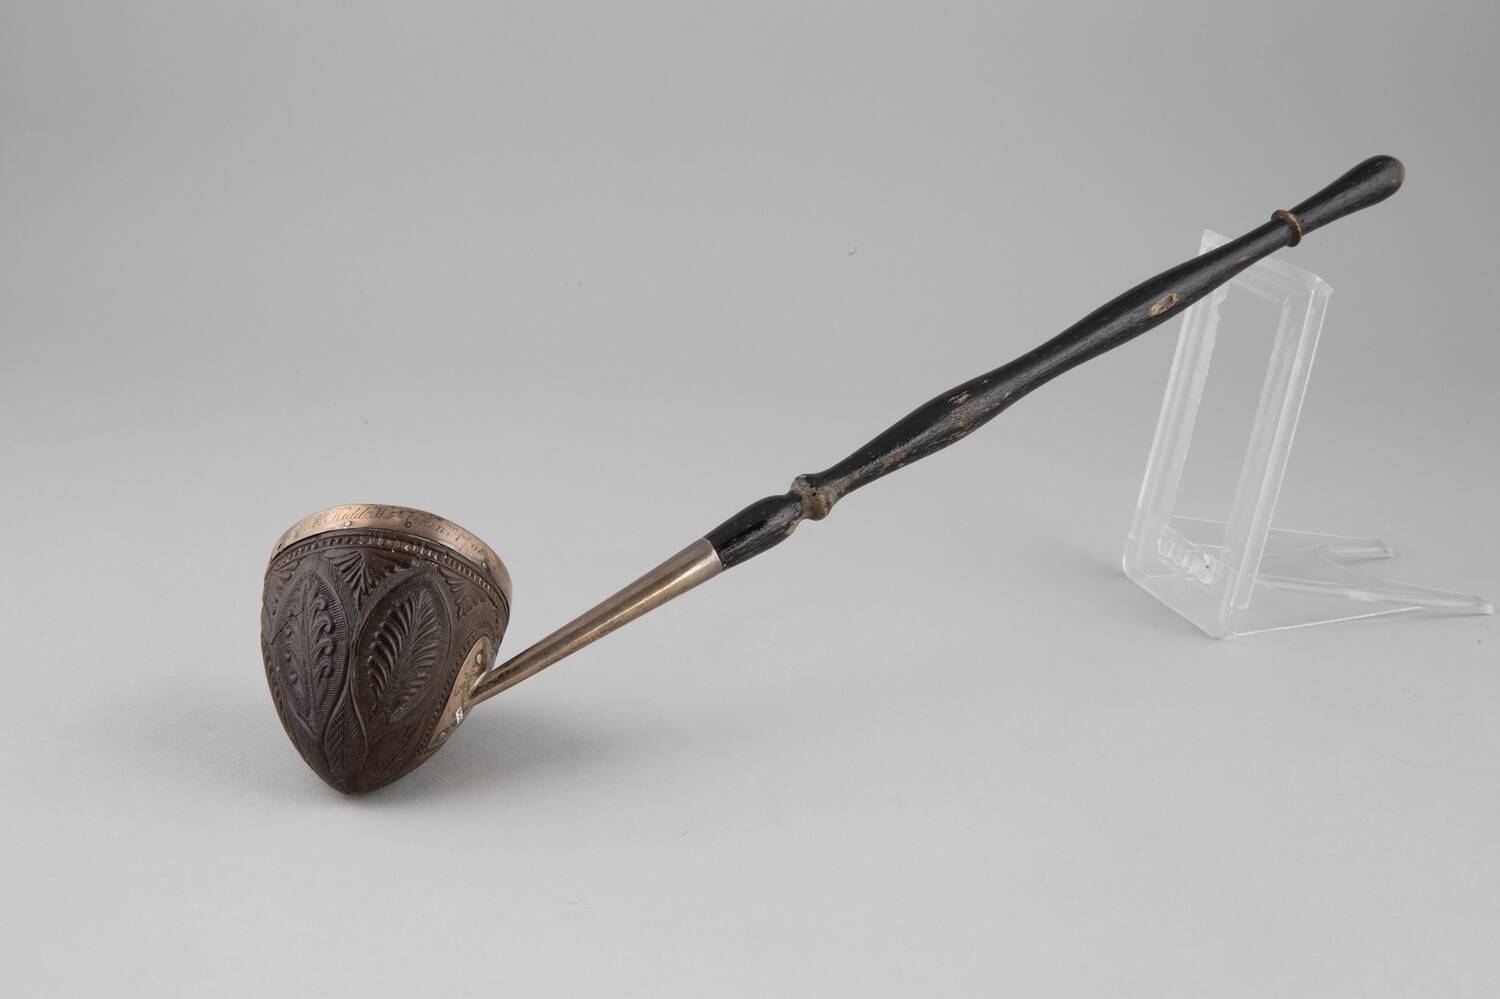 A small, silver-mounted coconut shell ladle with a black painted wooden handle is displayed against a plain grey background, resting its handle on a perspex holder.